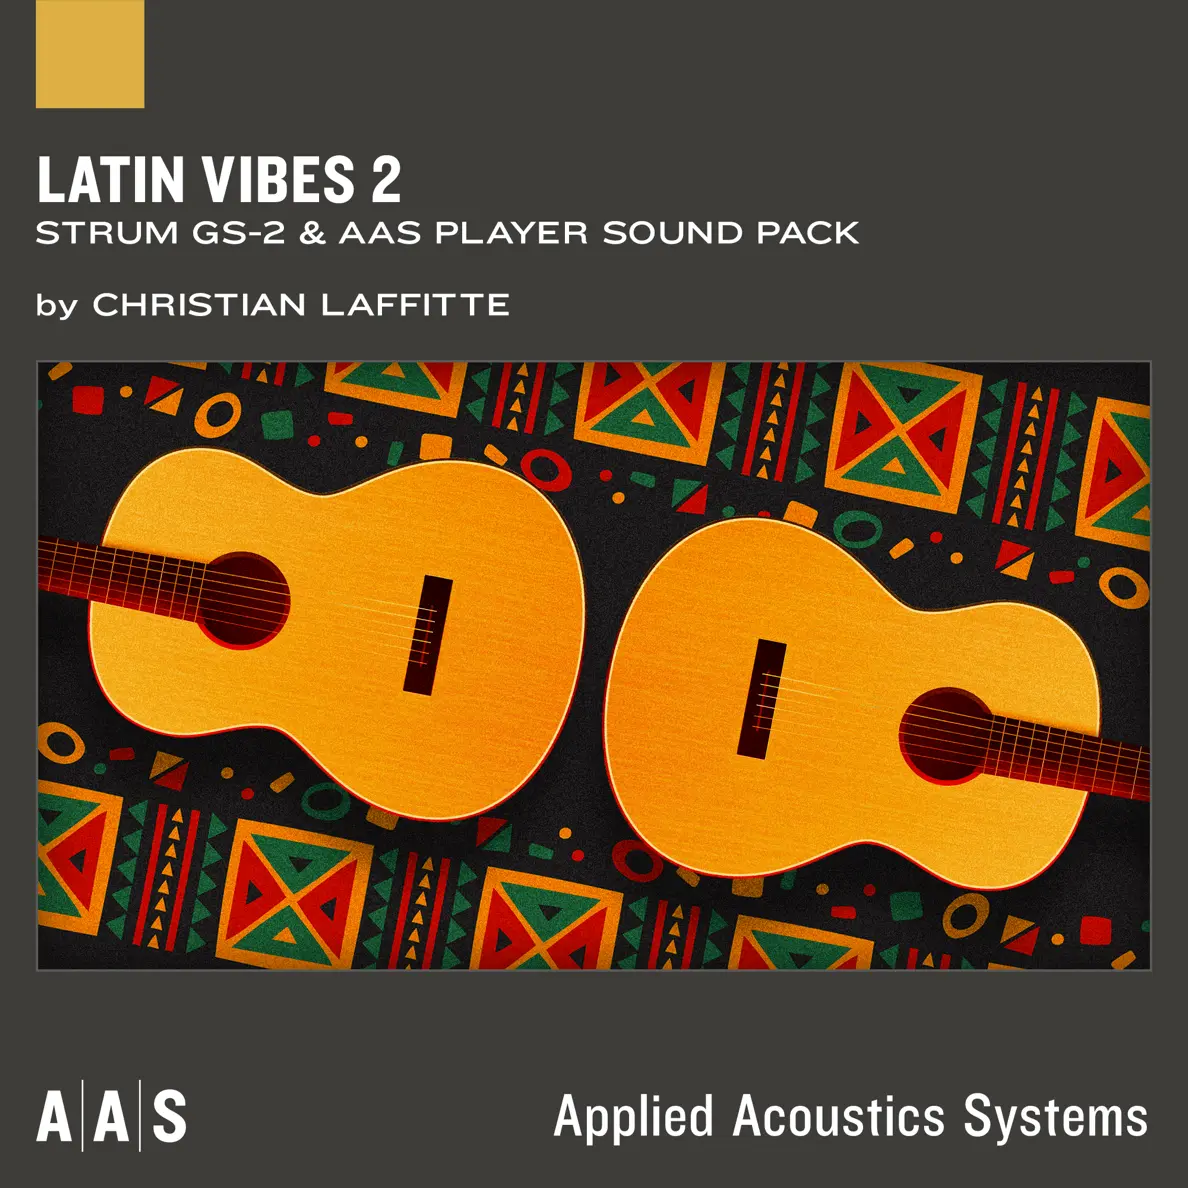 Strum and AAS Player sound pack ： Latin Vibes 2